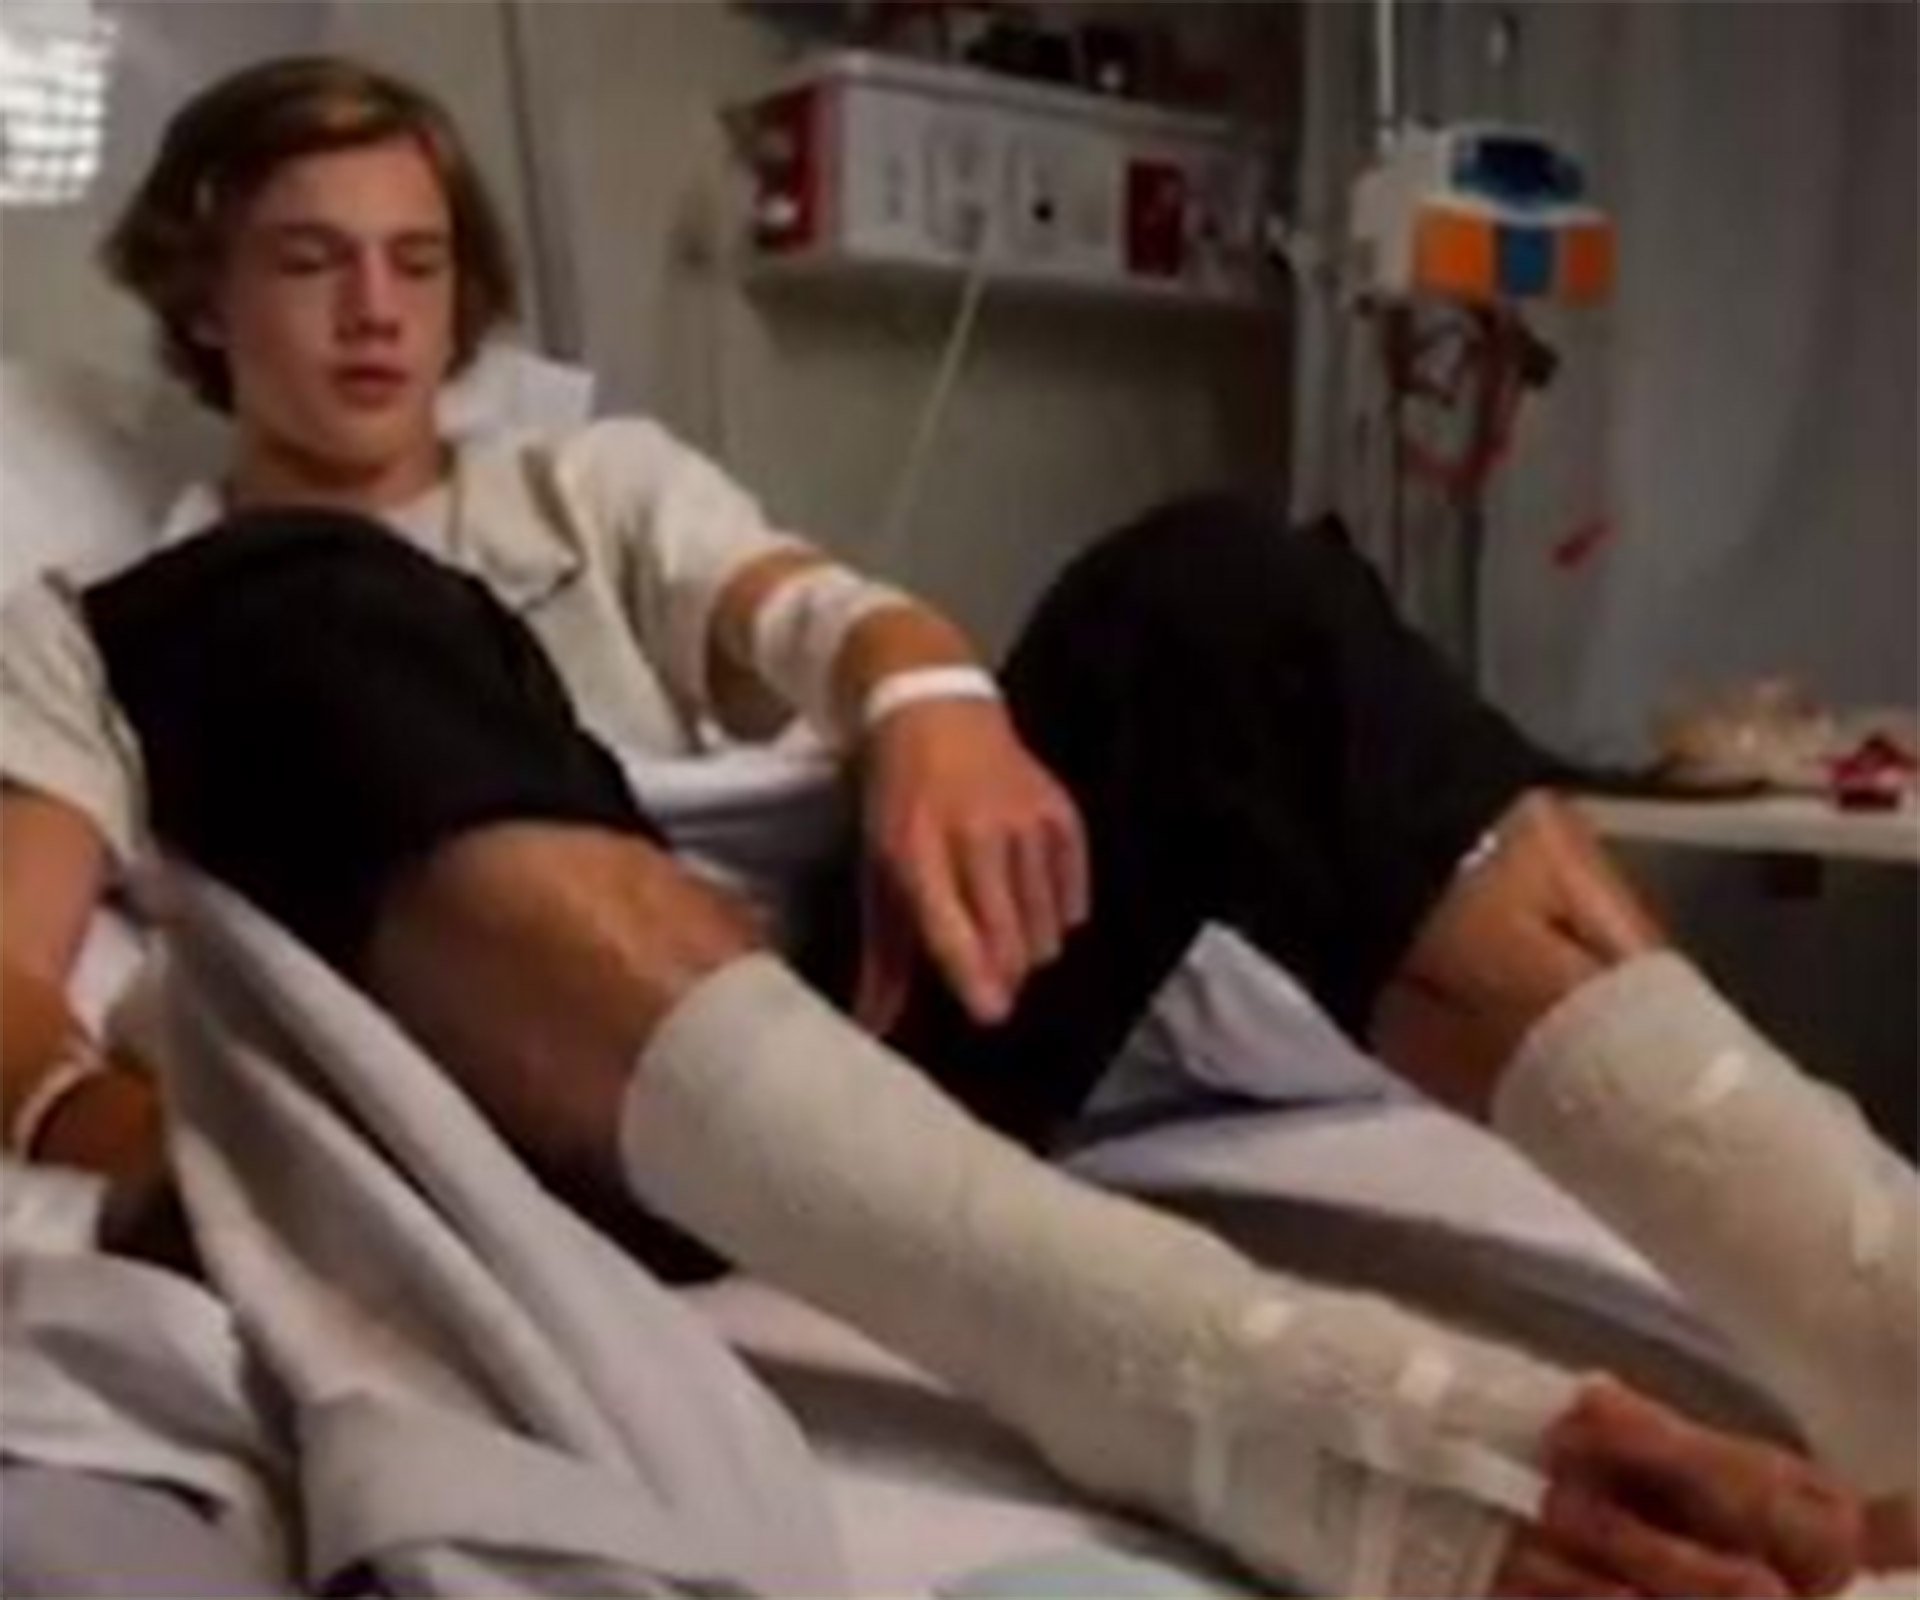 Melbourne teen ‘eaten’ by mystery sea creatures after going for a quick dip after footie